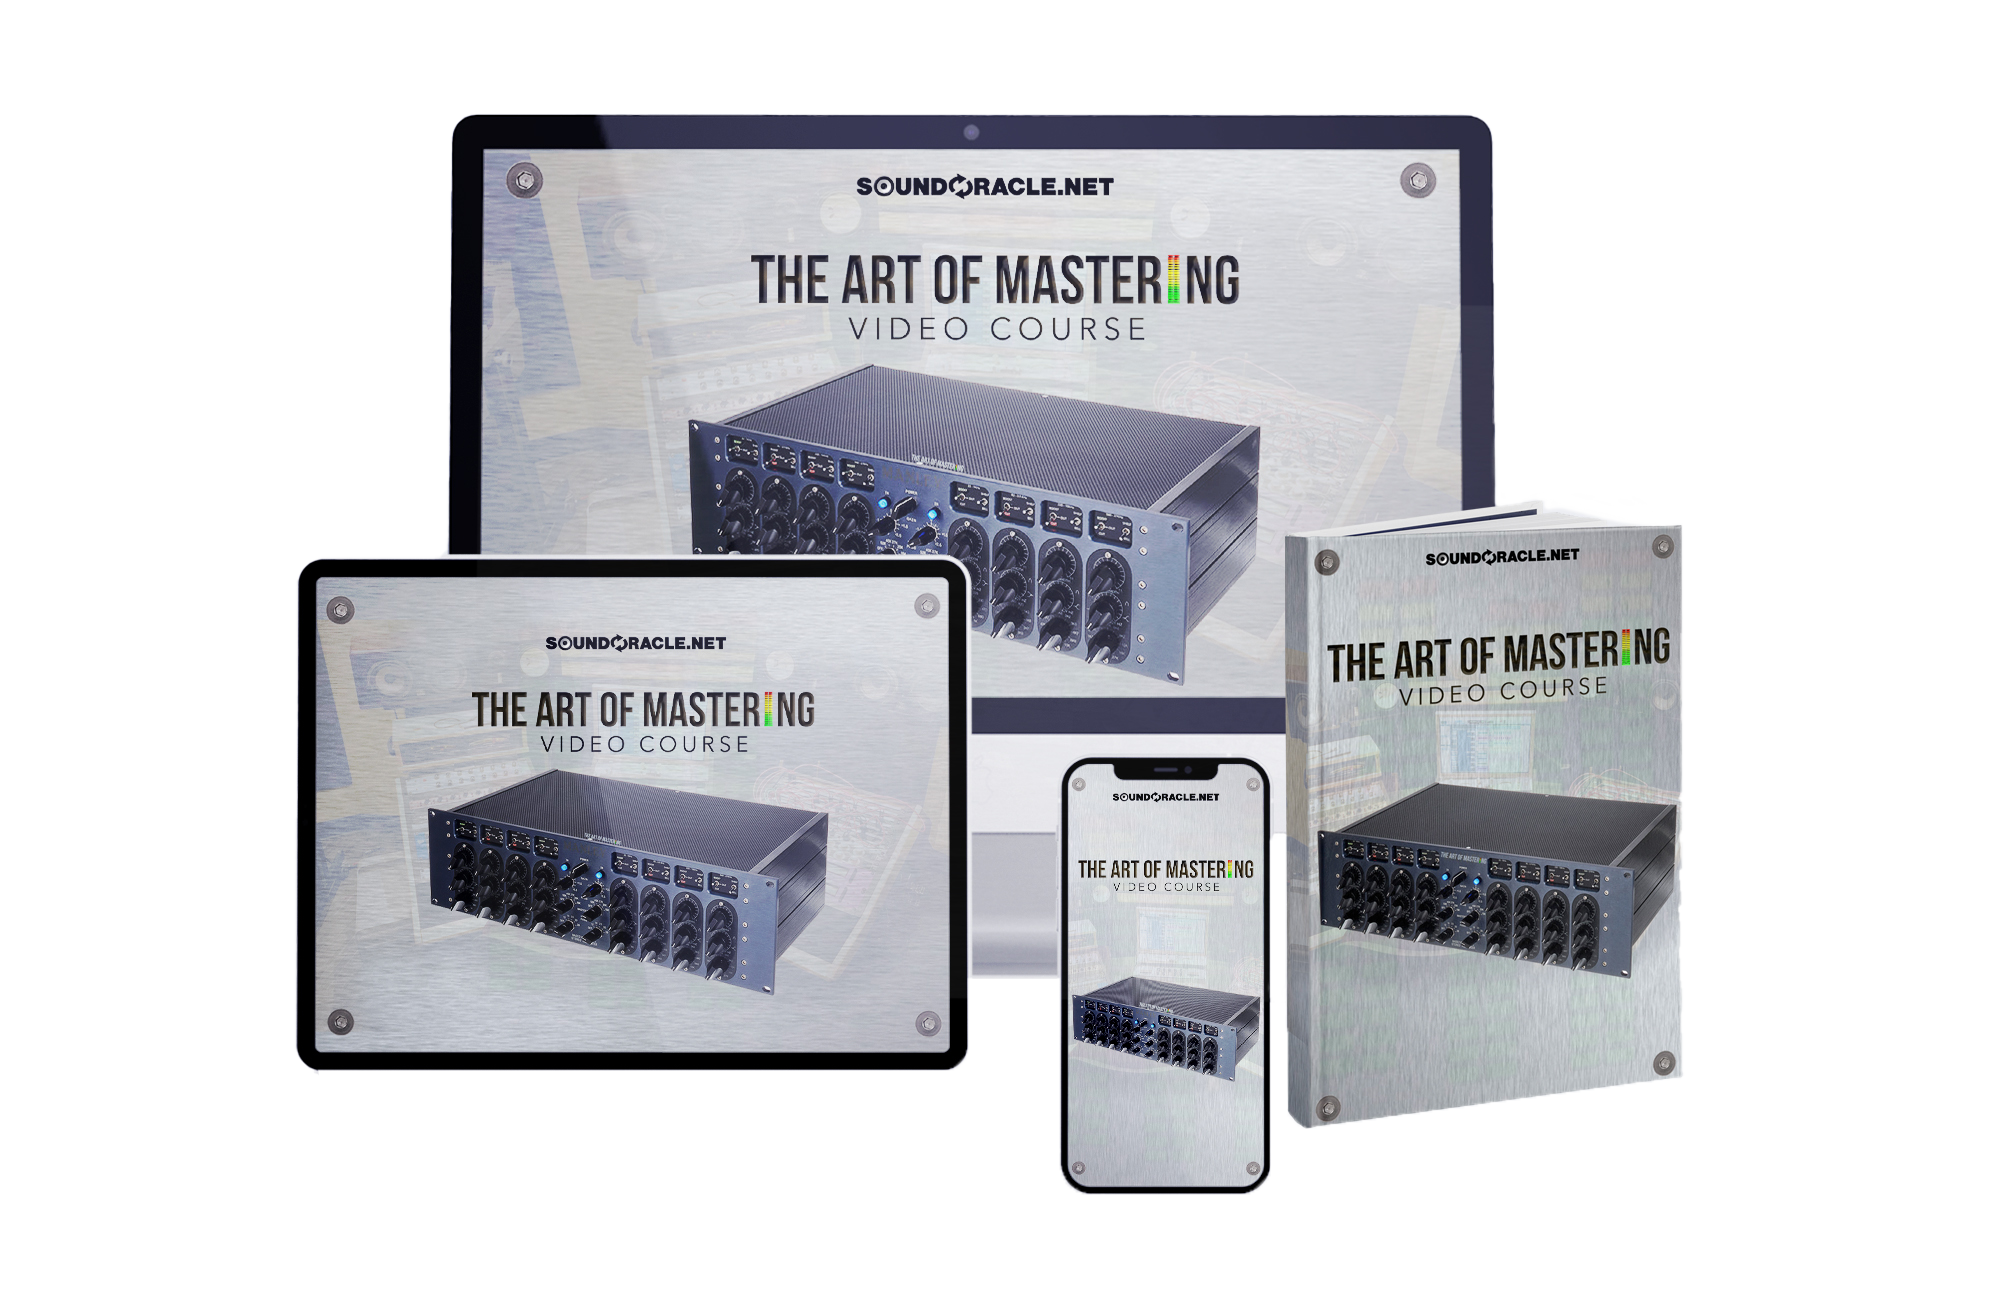 The Art of Mastering